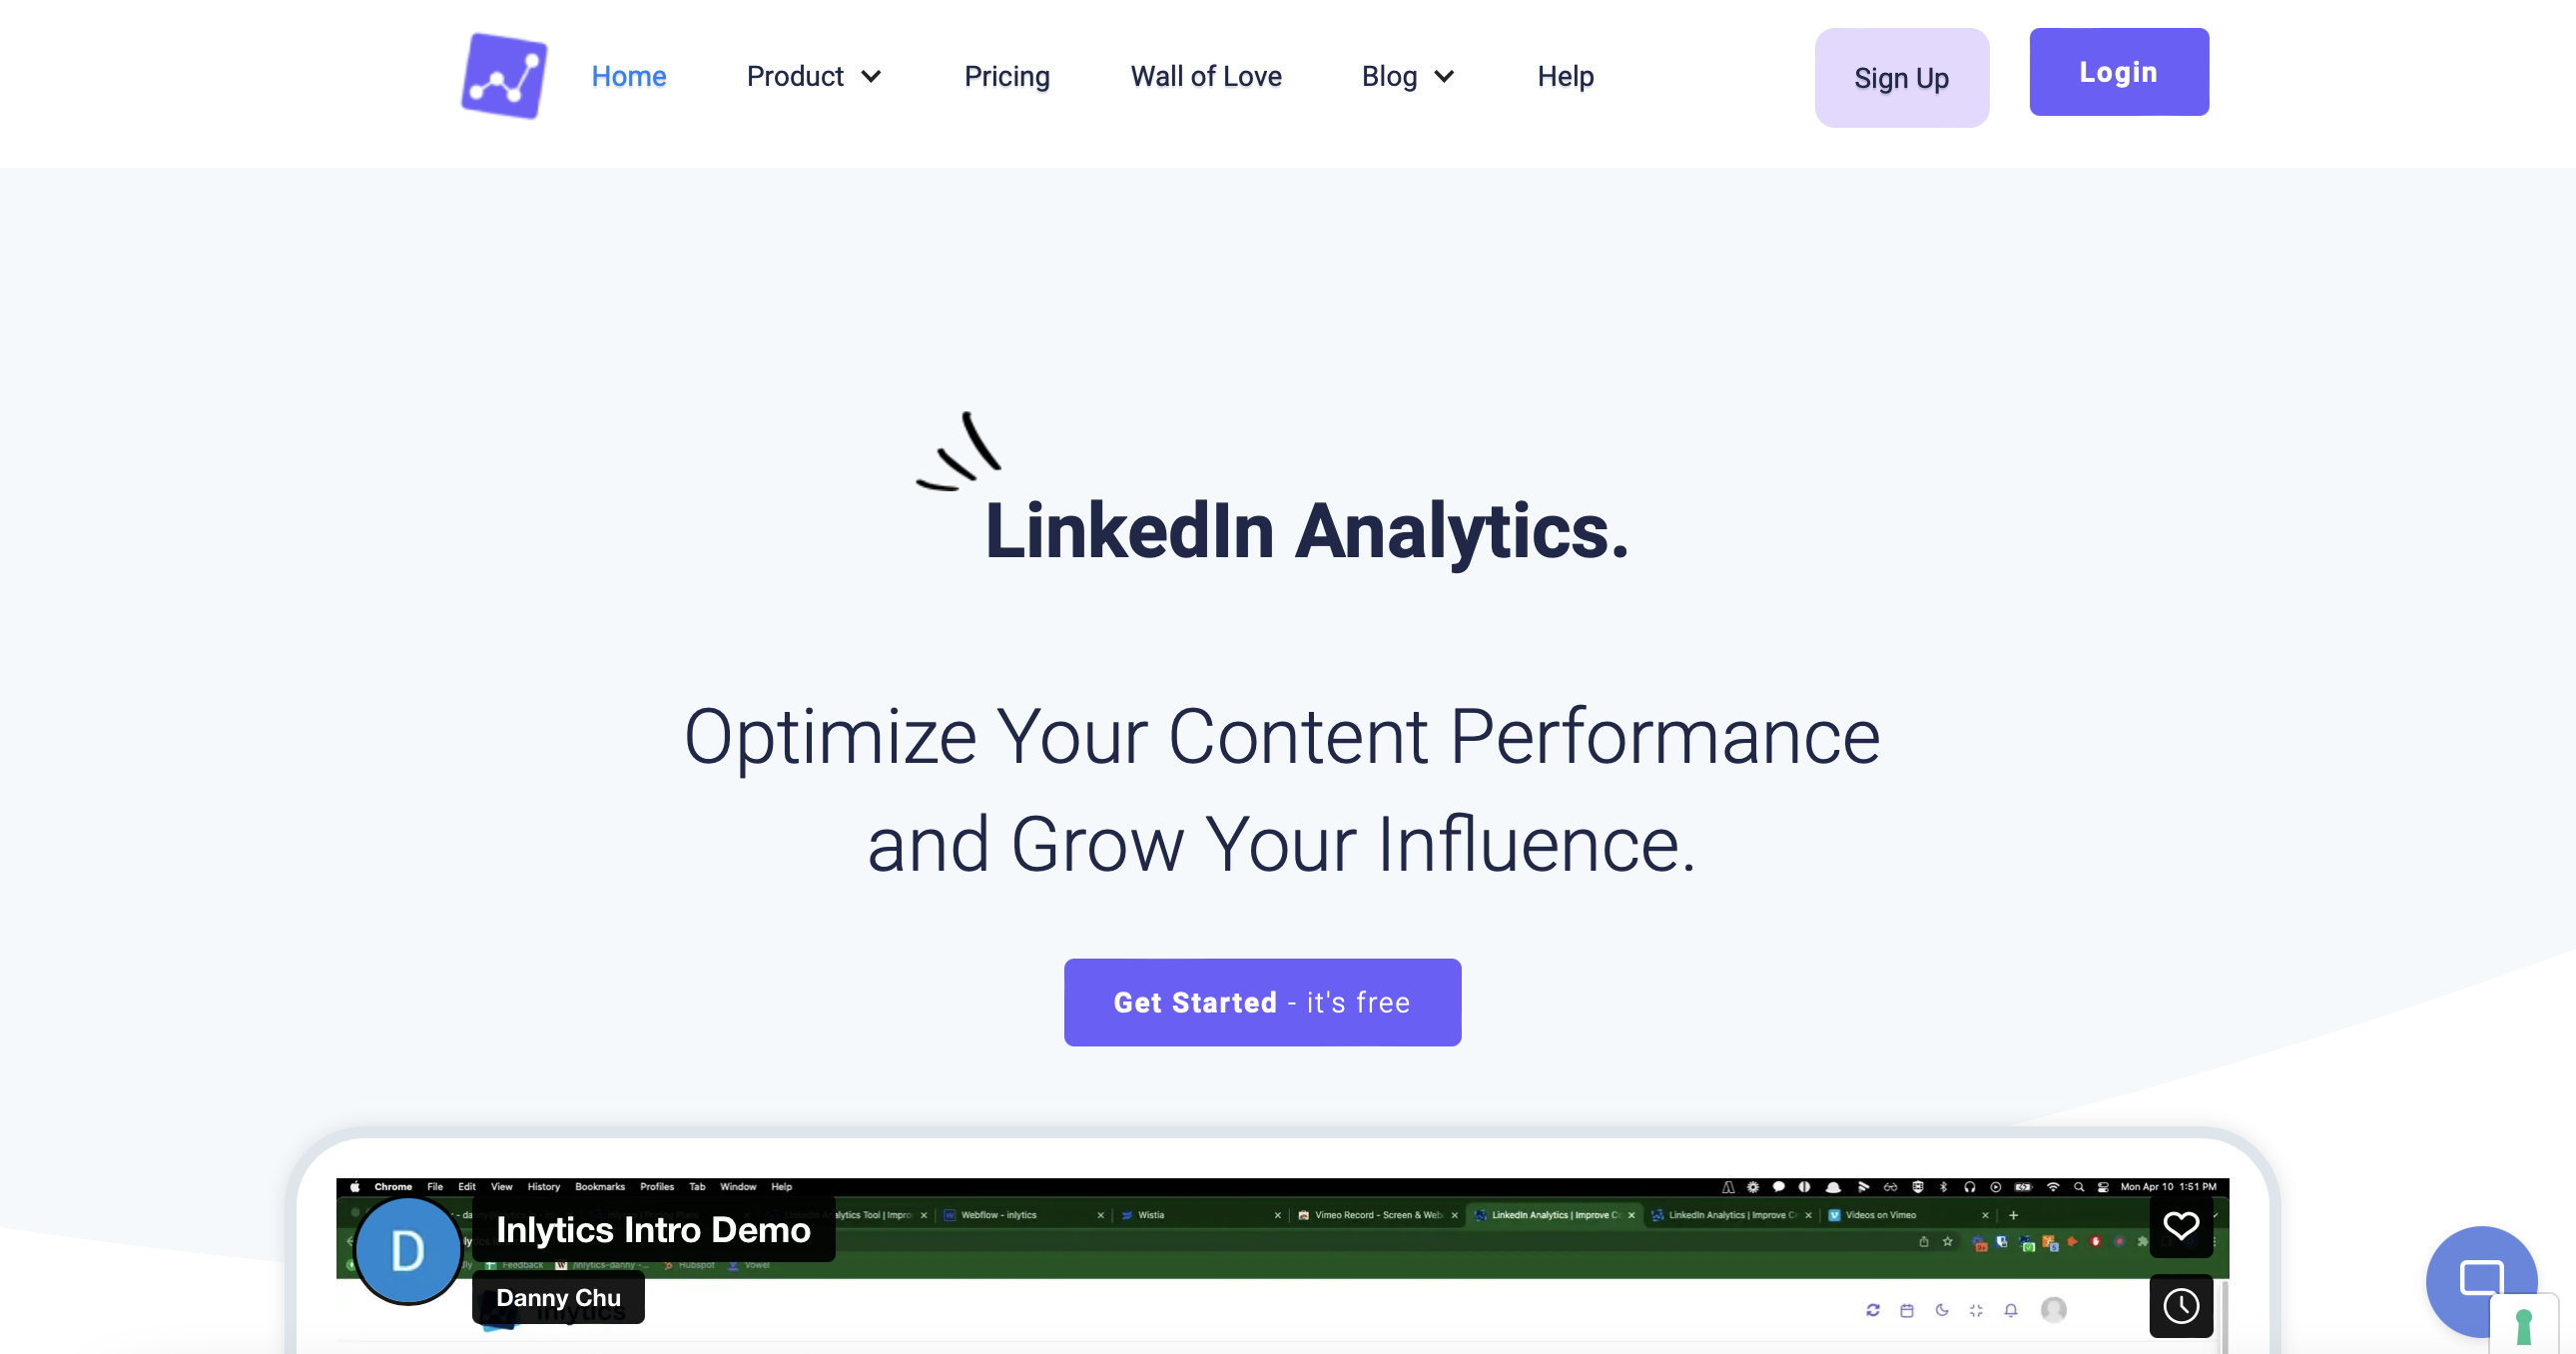 Inlytics homepage with text that reads "LinkedIn analytics. Optimize your content performance and grow your influence"